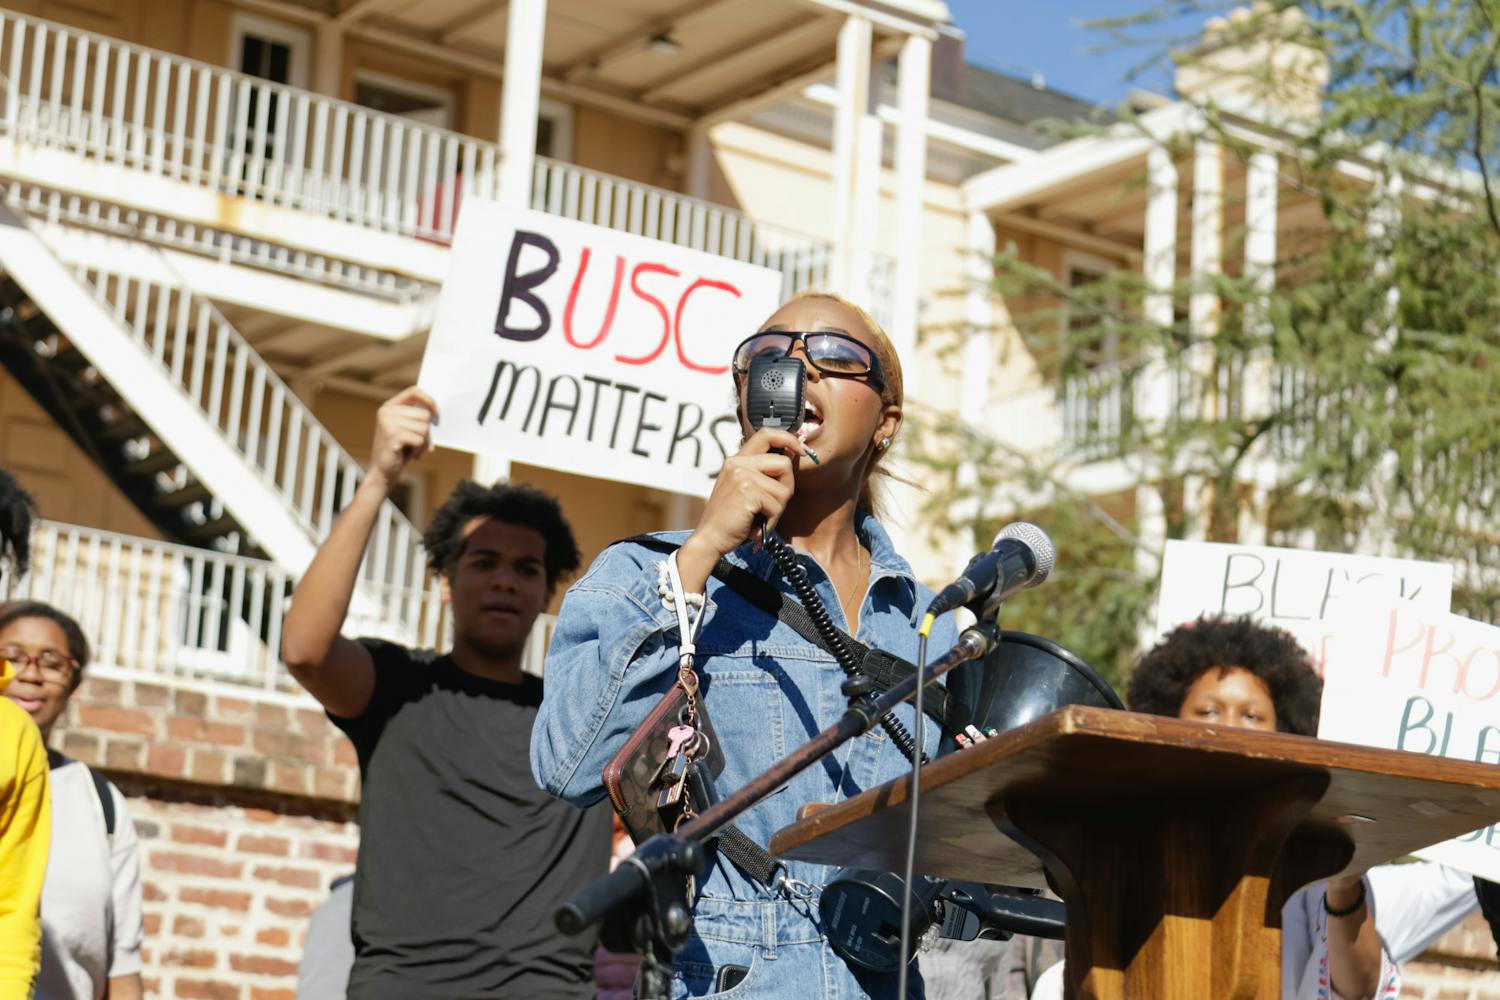 Students gathered for a protest against "racist culture" at USC on Jan. 20, 2023. The protest began at the McKissick Museum on the Horseshoe and ended on Greene Street with students rallying outside Russell House Student Union to share their experiences. Courtney McClain, a fourth-year broadcast journalism student and activist, organized the protest after a TikTok video of an individual claiming to be a USC student and repeatedly saying an anti-Black racial slur went viral last week. The university has confirmed that said individual is not a USC student.&nbsp;